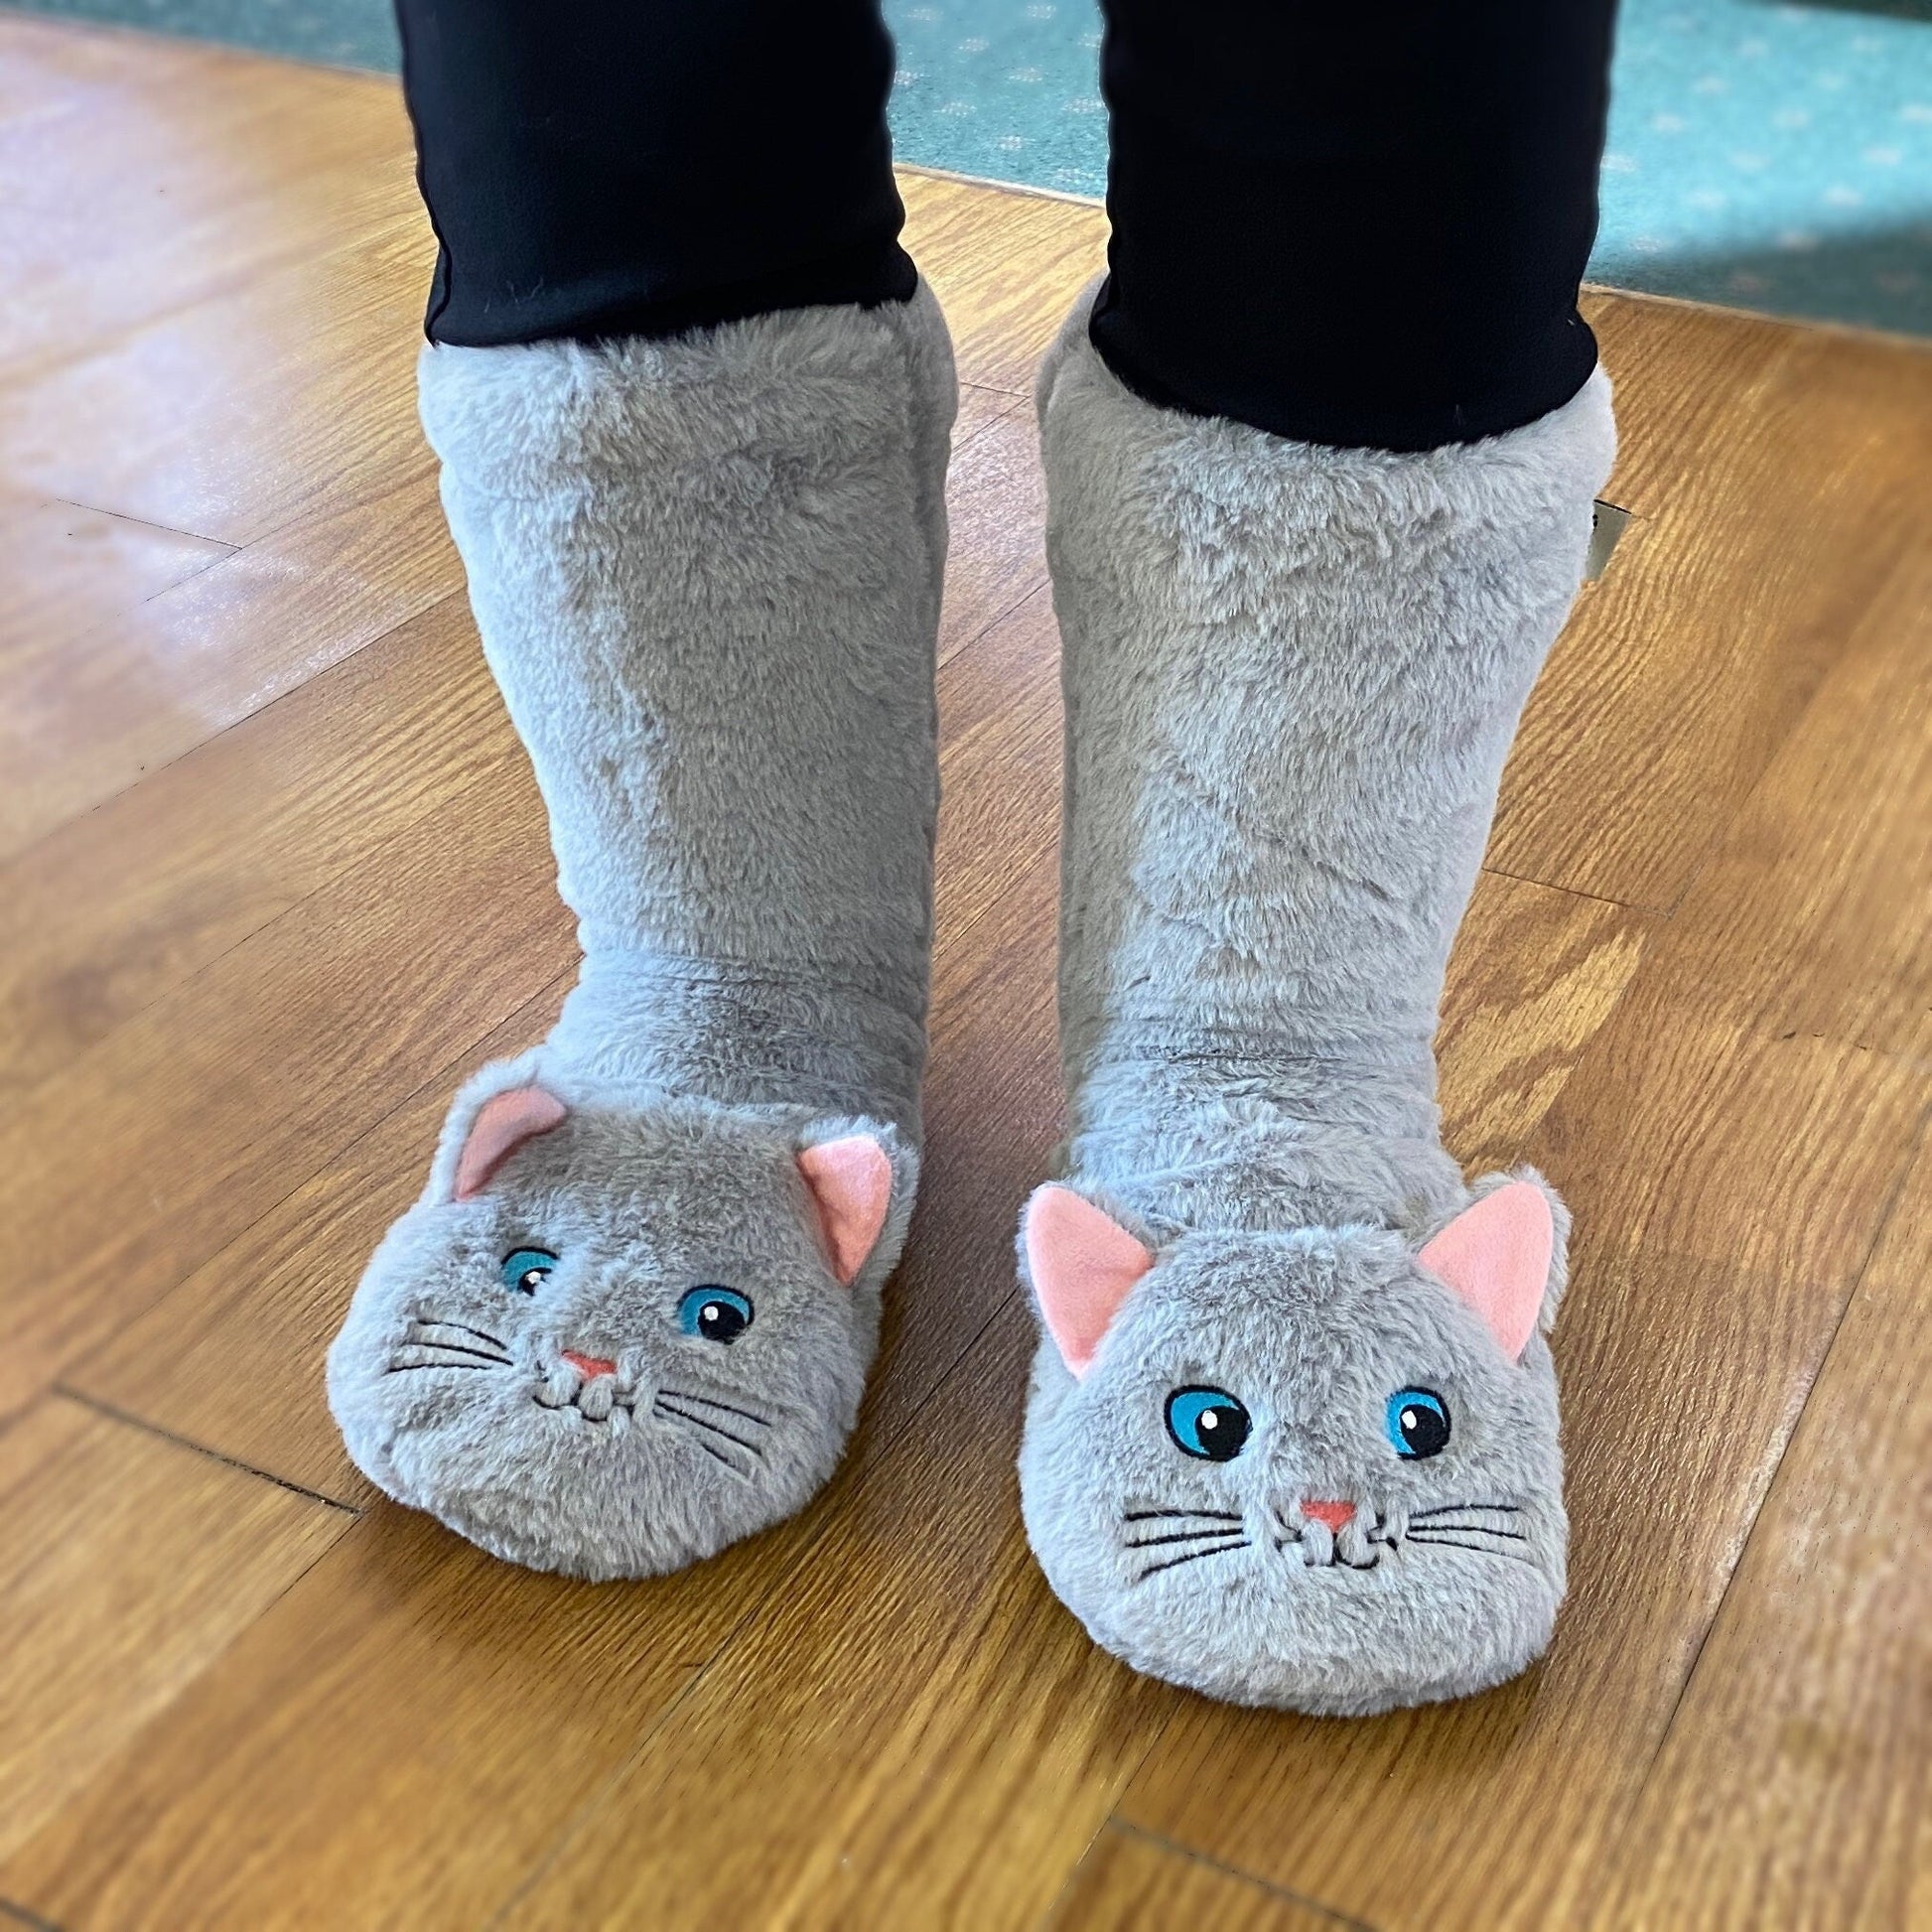 Fuzzy Cozy Warm Gray Cat/Kitty Slippers - Plush Slipper (Adult) - – Northern Lights Gallery